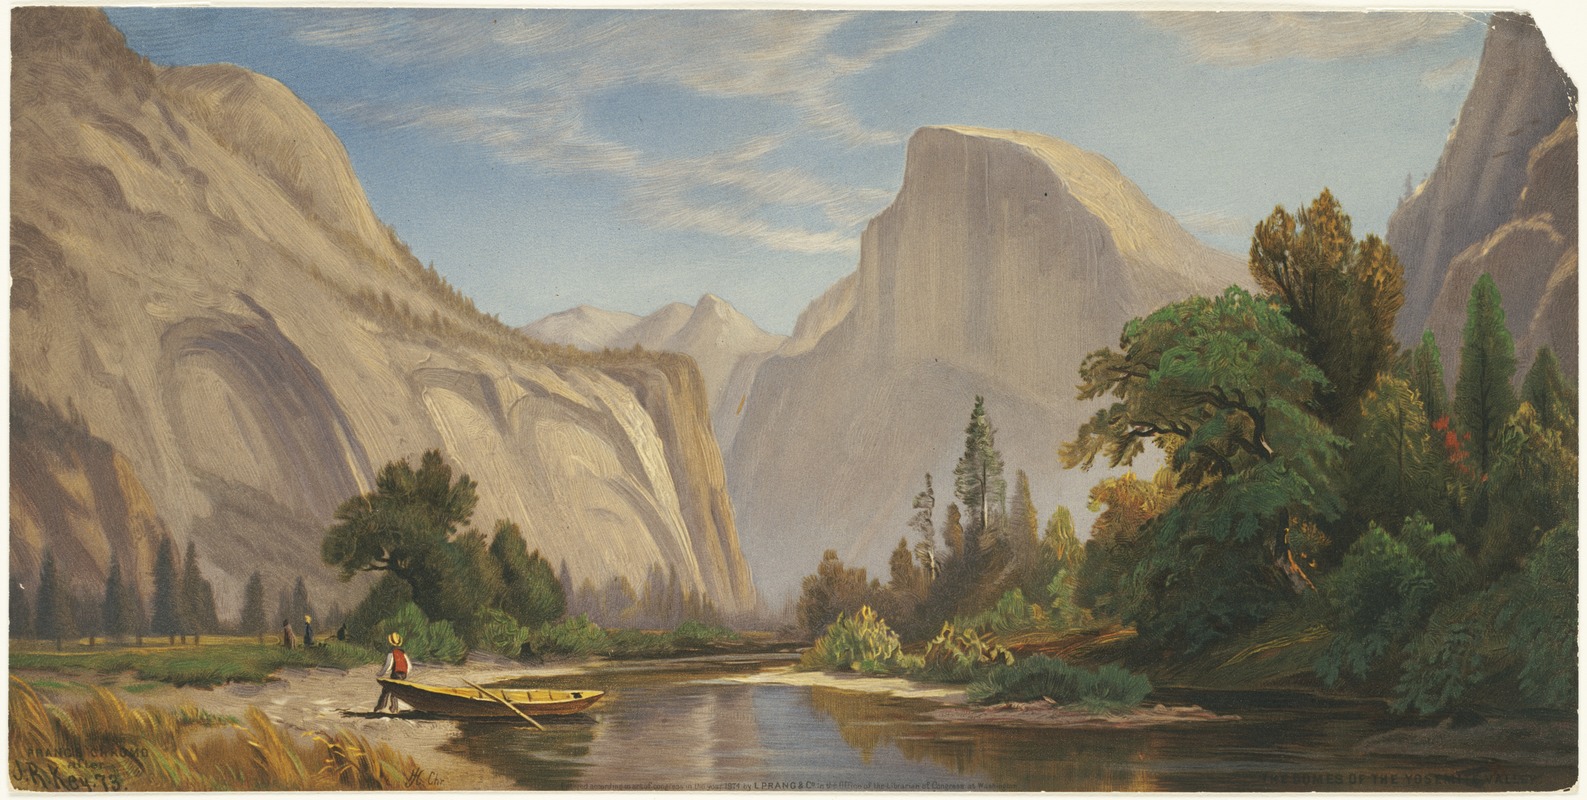 The domes of the Yosemite Valley